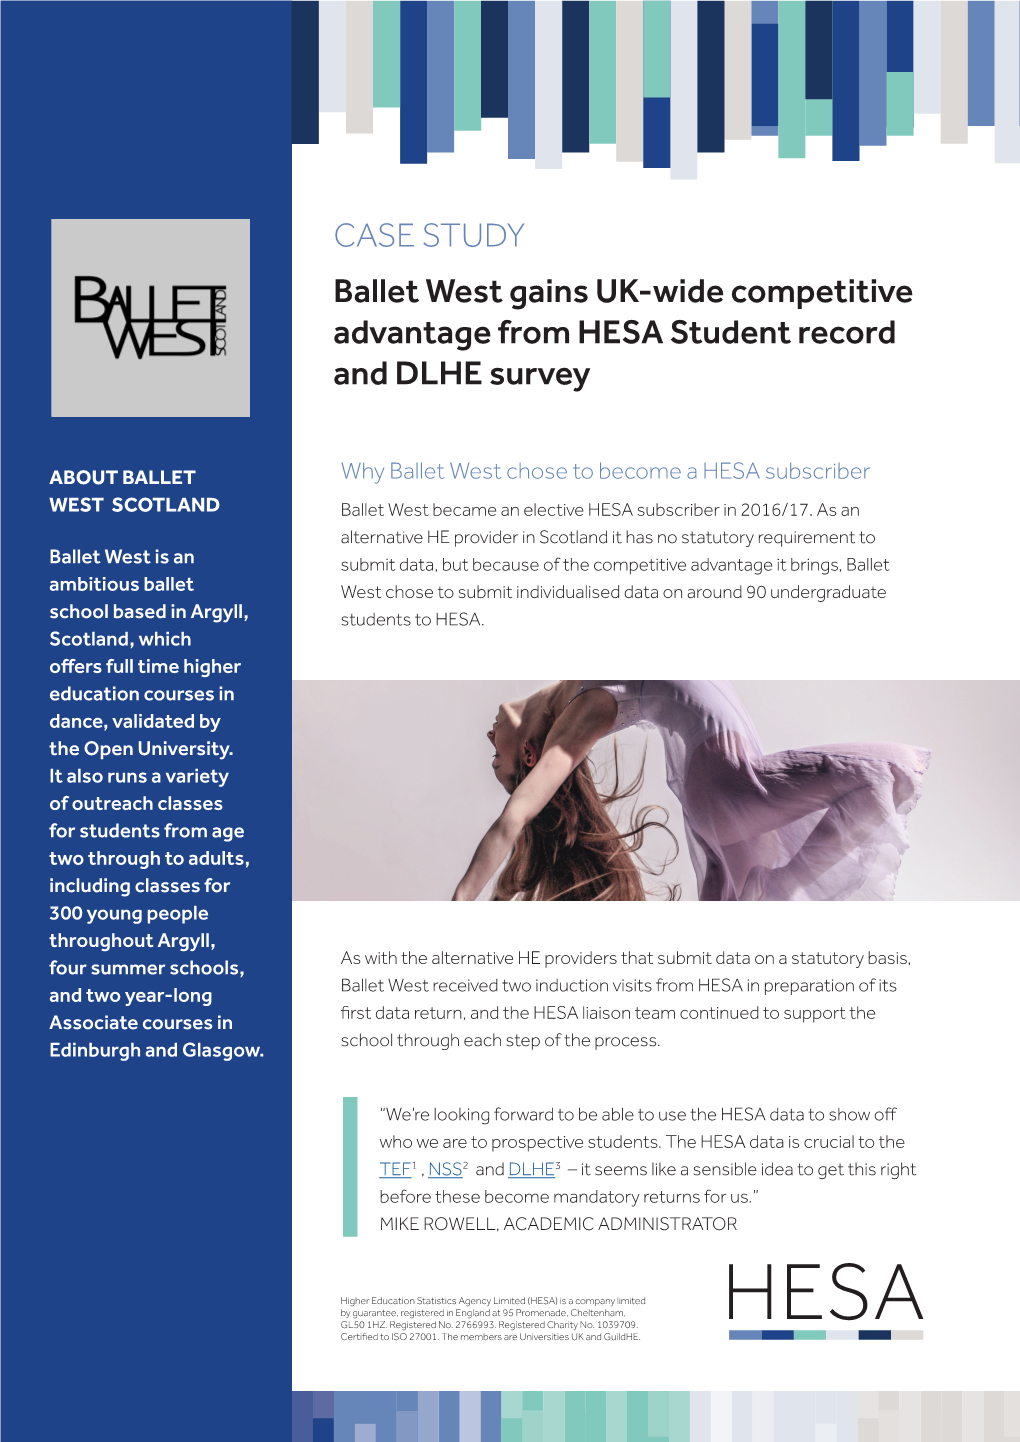 CASE STUDY Ballet West Gains UK-Wide Competitive Advantage from HESA Student Record and DLHE Survey